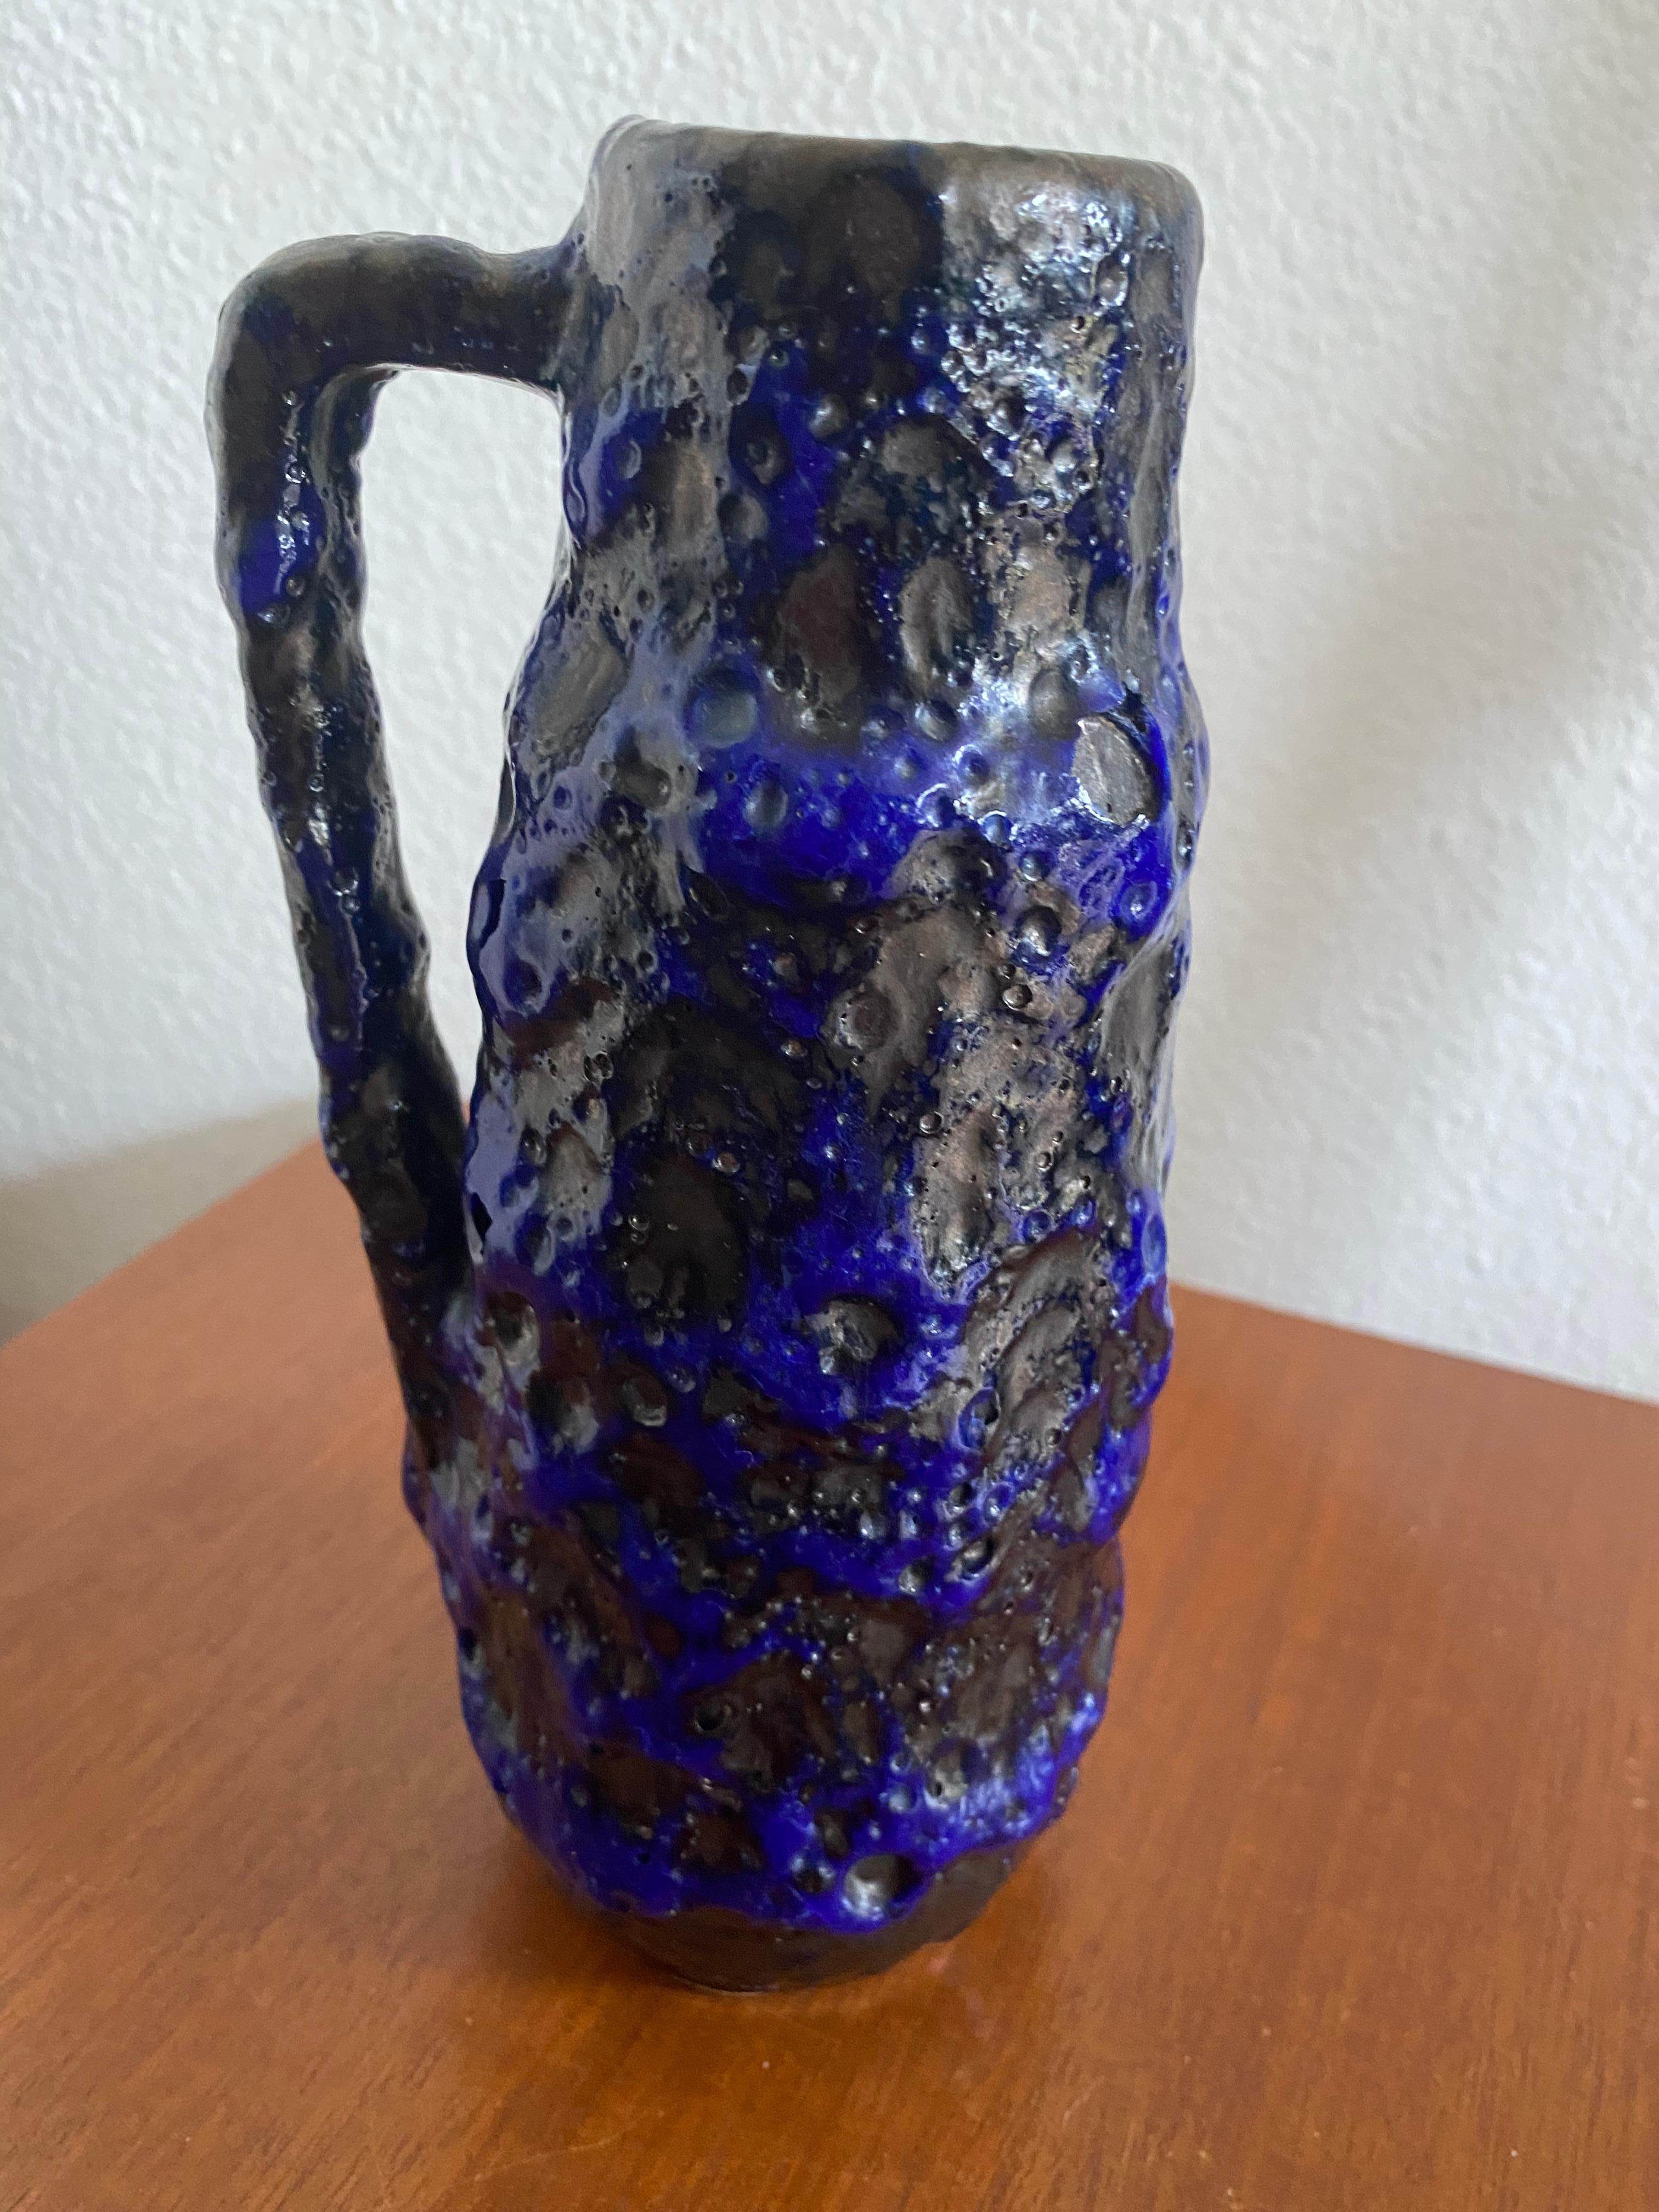 A vibrant blue and grey Fat Lava vase by Scheurich Keramik. The lava on this vase is quite thick.

